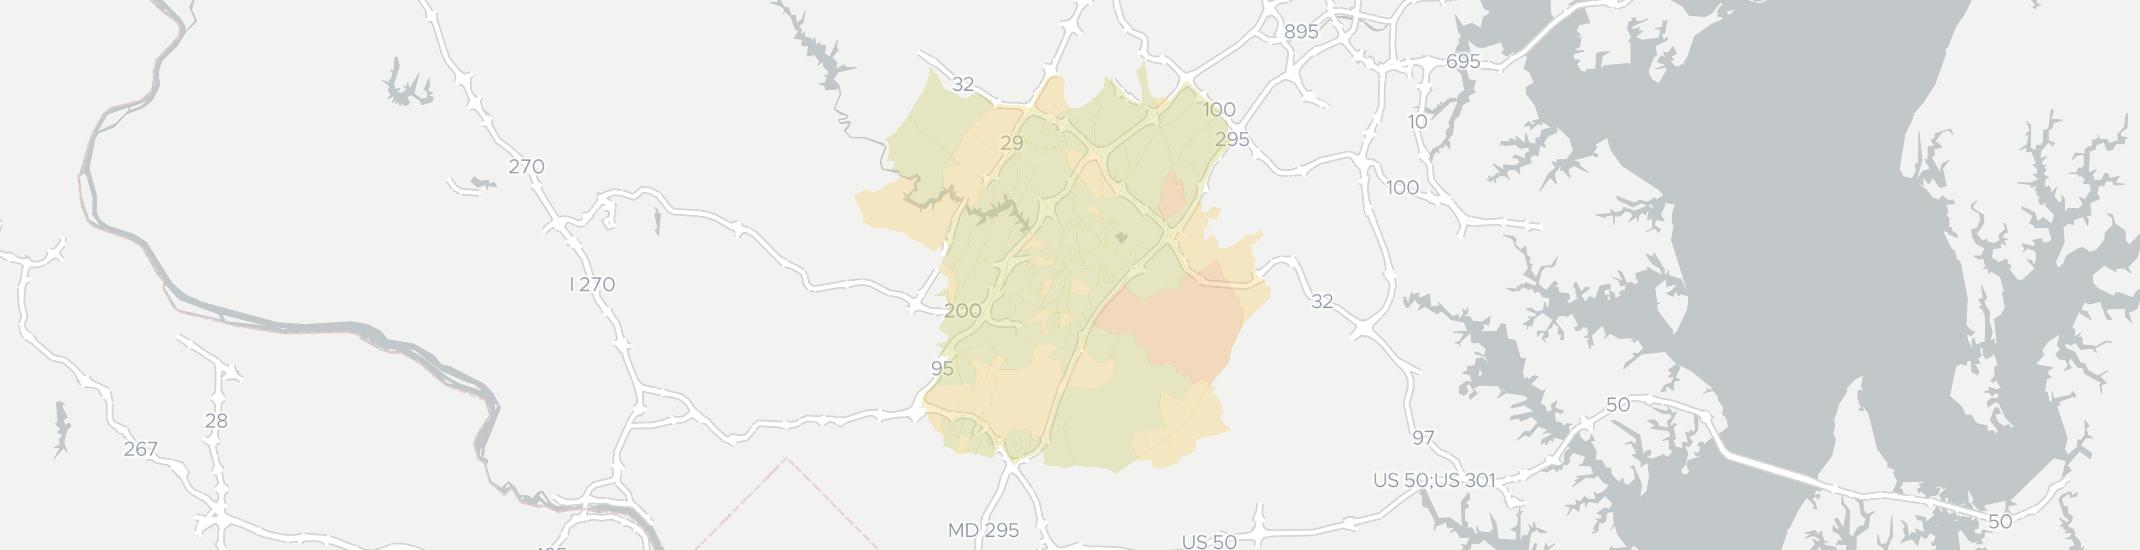 Laurel Internet Competition Map. Click for interactive map